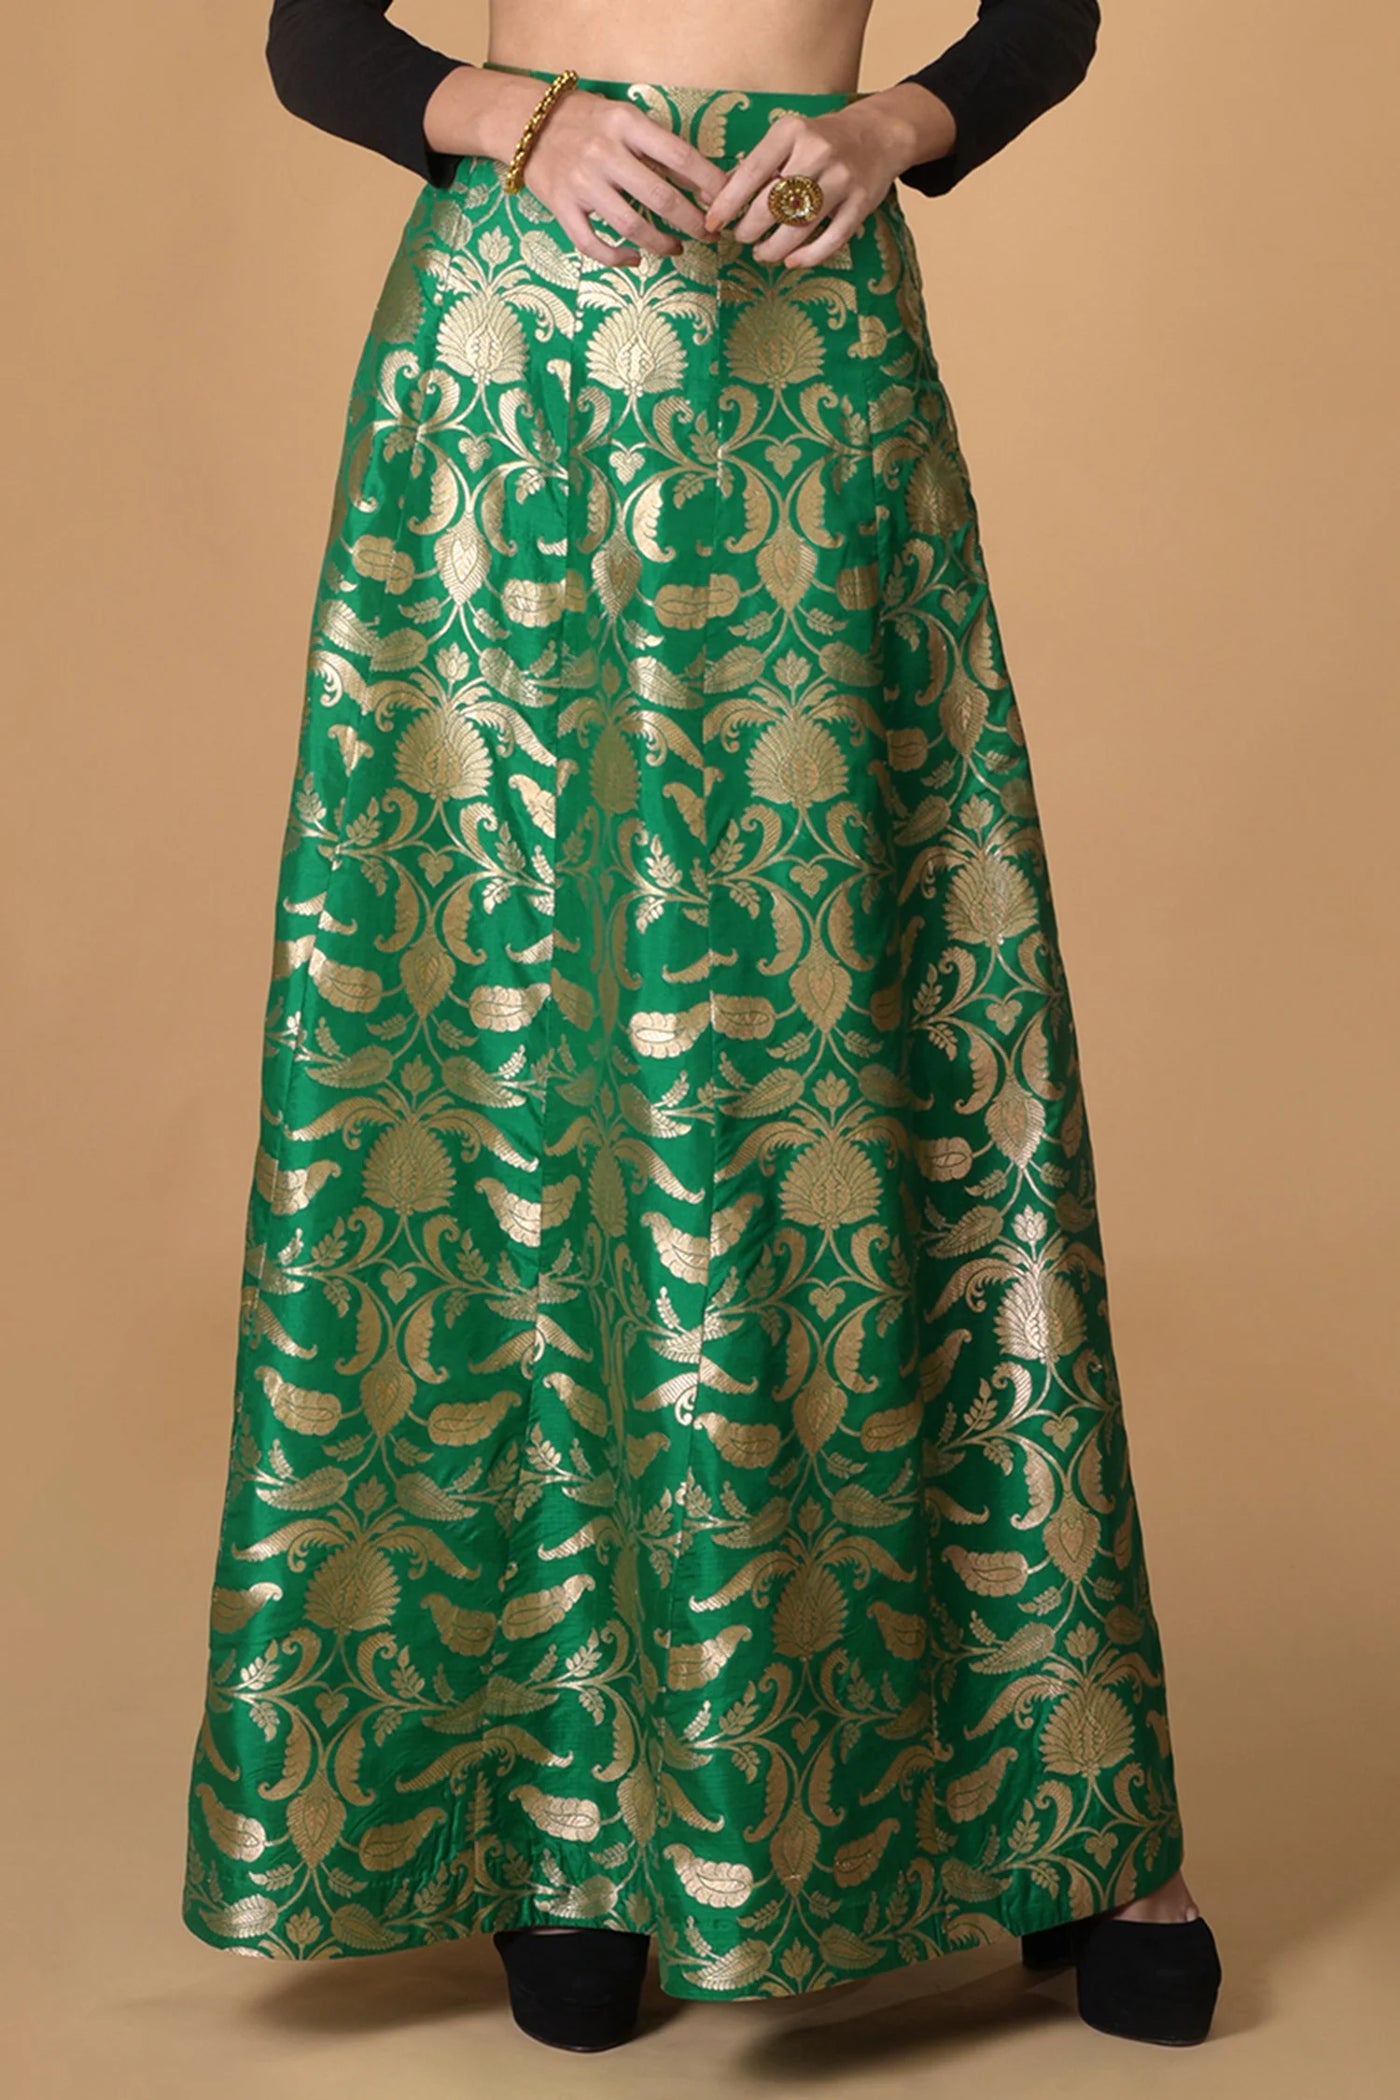 Green Silk Brocade Lehenga Indian Clothing in Denver, CO, Aurora, CO, Boulder, CO, Fort Collins, CO, Colorado Springs, CO, Parker, CO, Highlands Ranch, CO, Cherry Creek, CO, Centennial, CO, and Longmont, CO. NATIONWIDE SHIPPING USA- India Fashion X